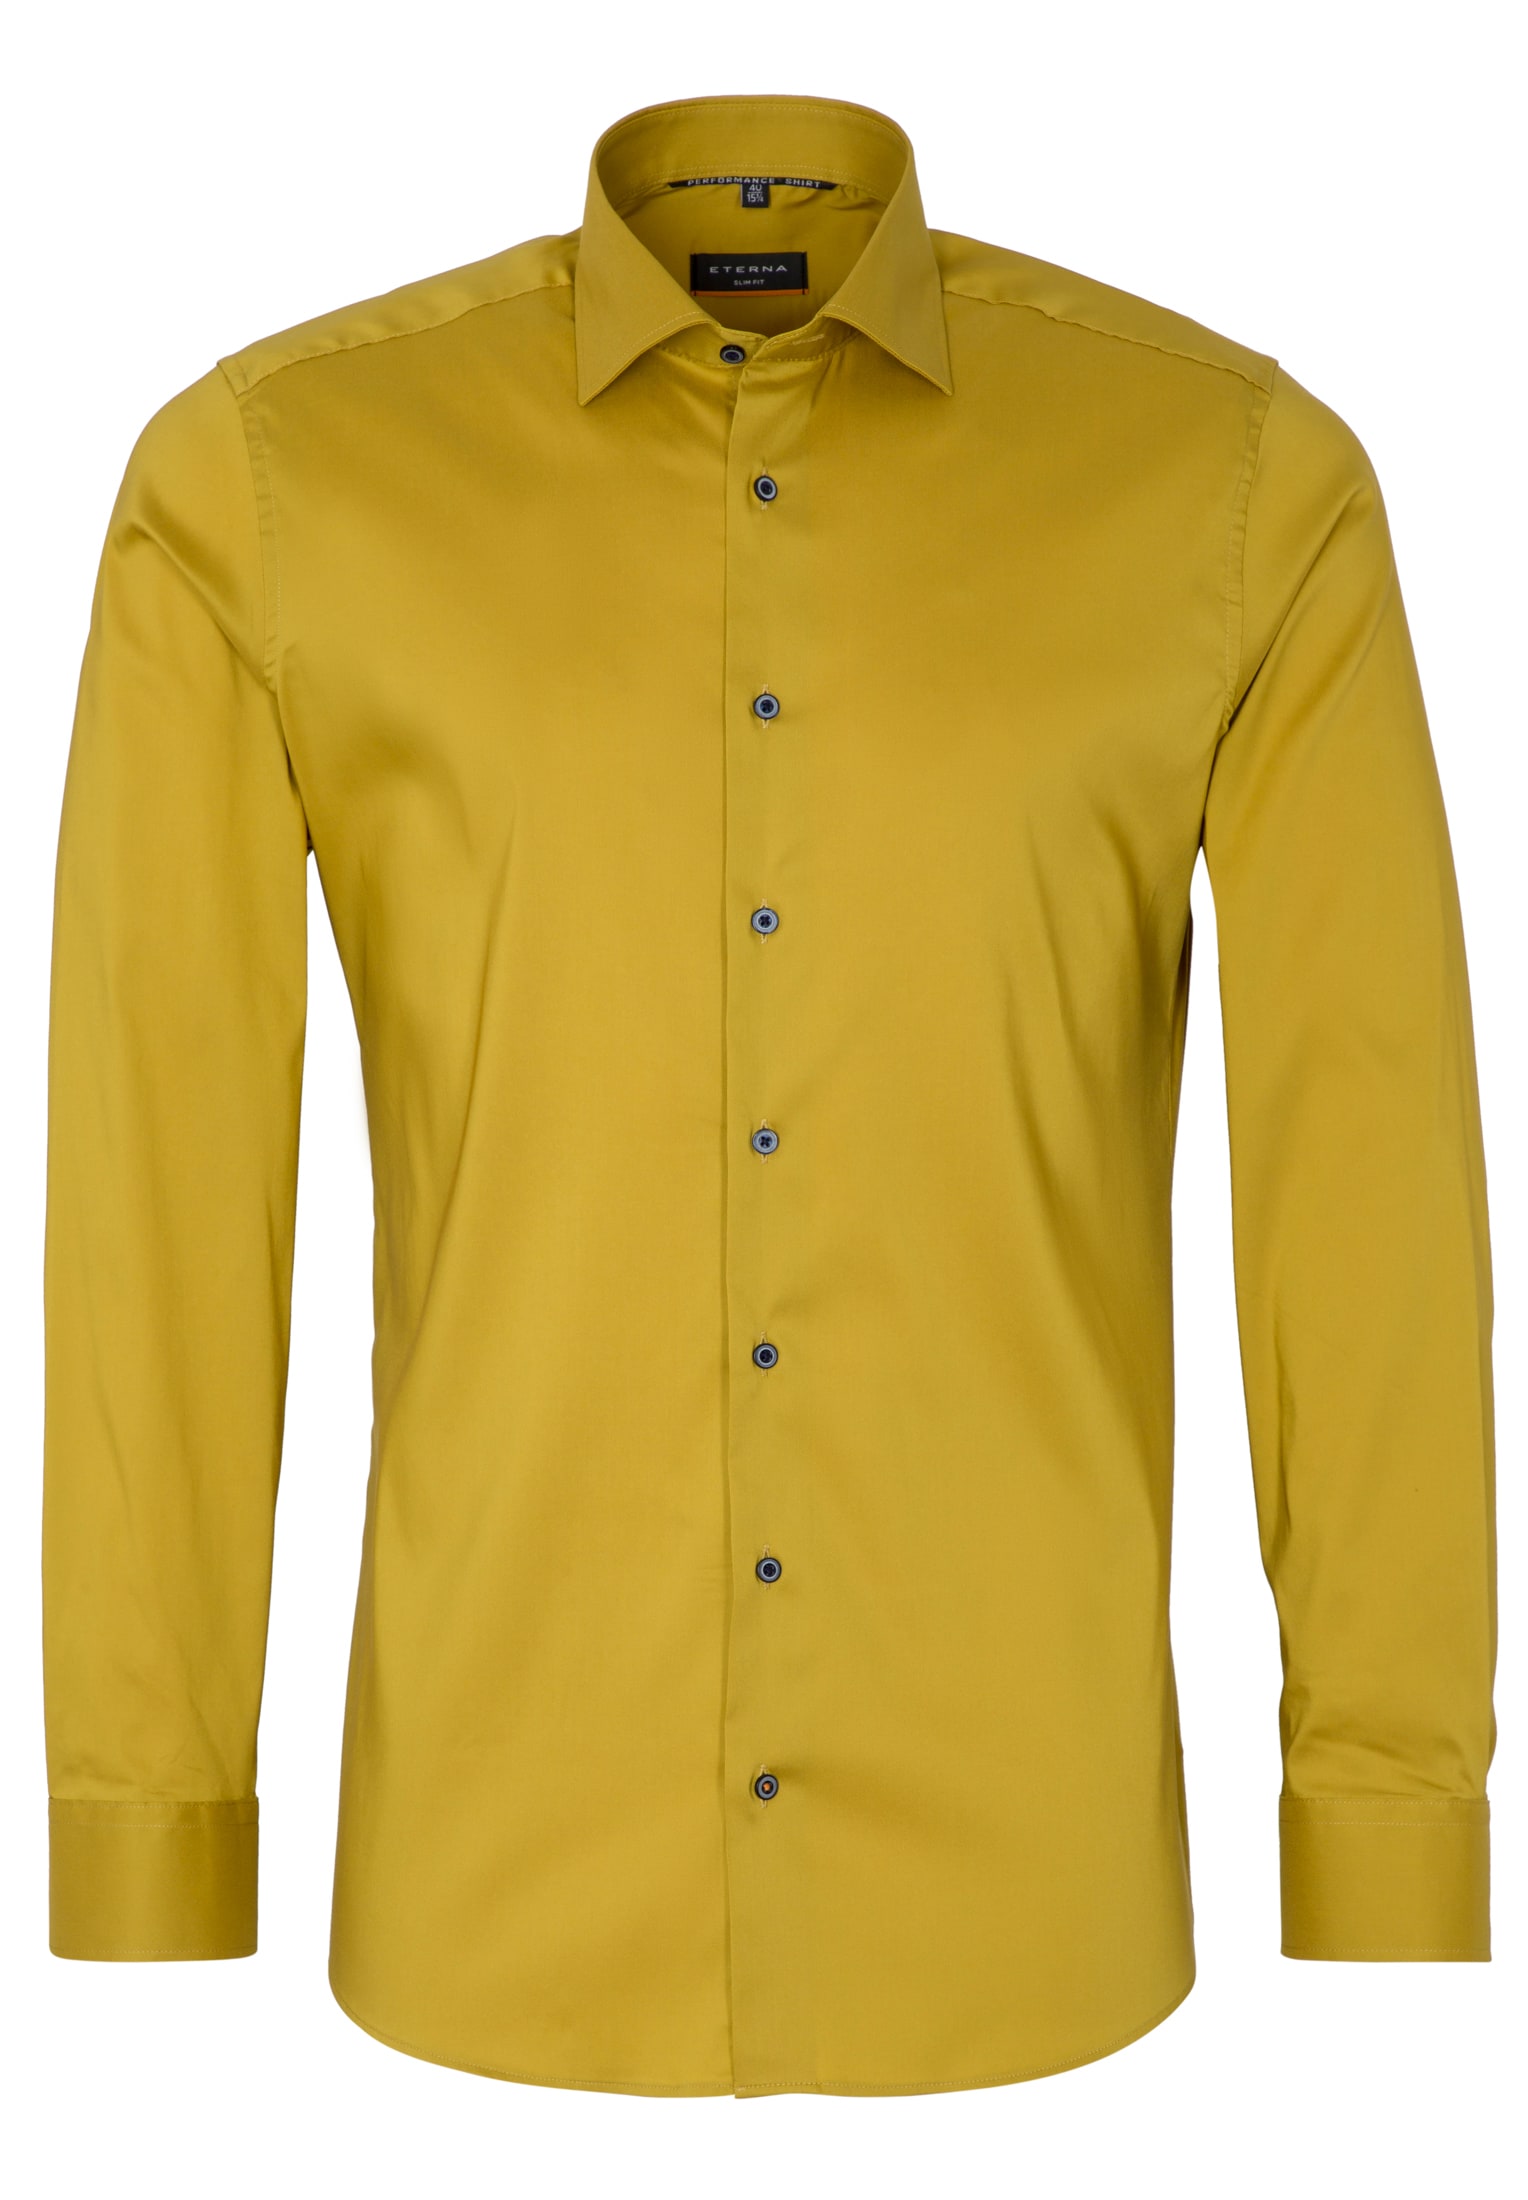 Shirt SLIM 1SH02217-07-61-44-1/1 | | FIT 44 curry plain | curry long Performance | in sleeve